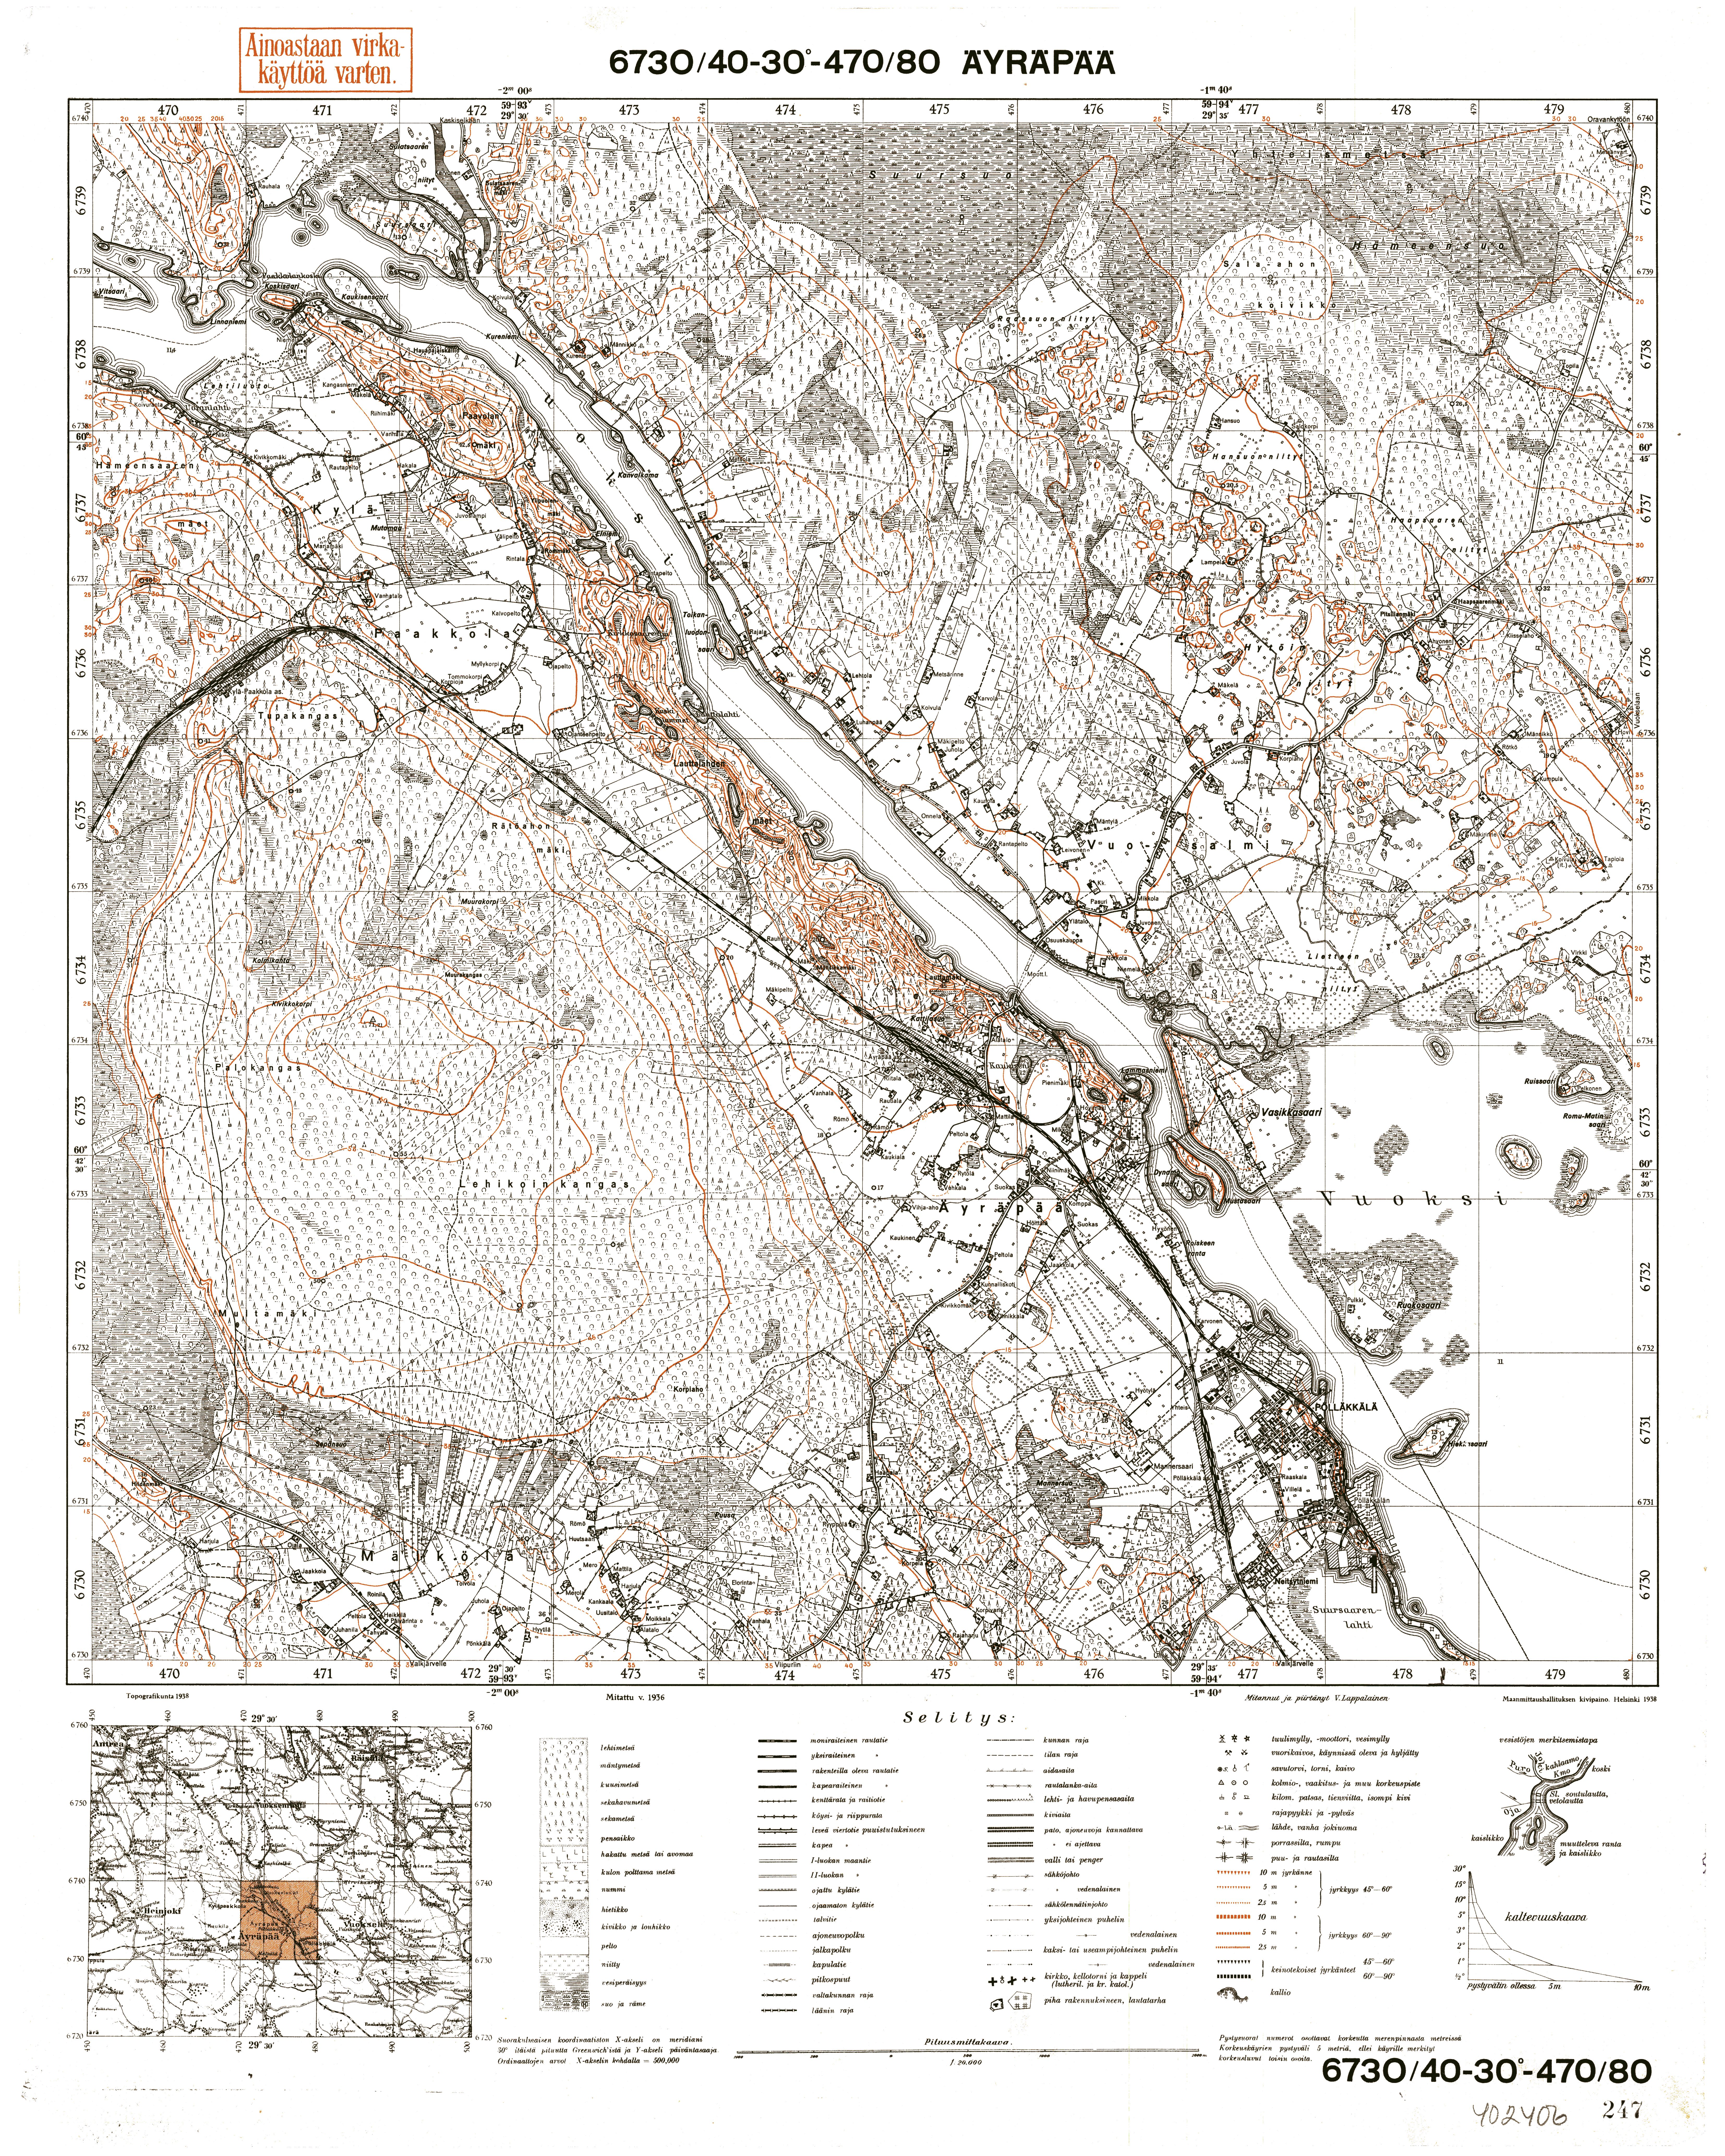 Baryševo. Äyräpää. Topografikartta 402406. Topographic map from 1935. Use the zooming tool to explore in higher level of detail. Obtain as a quality print or high resolution image